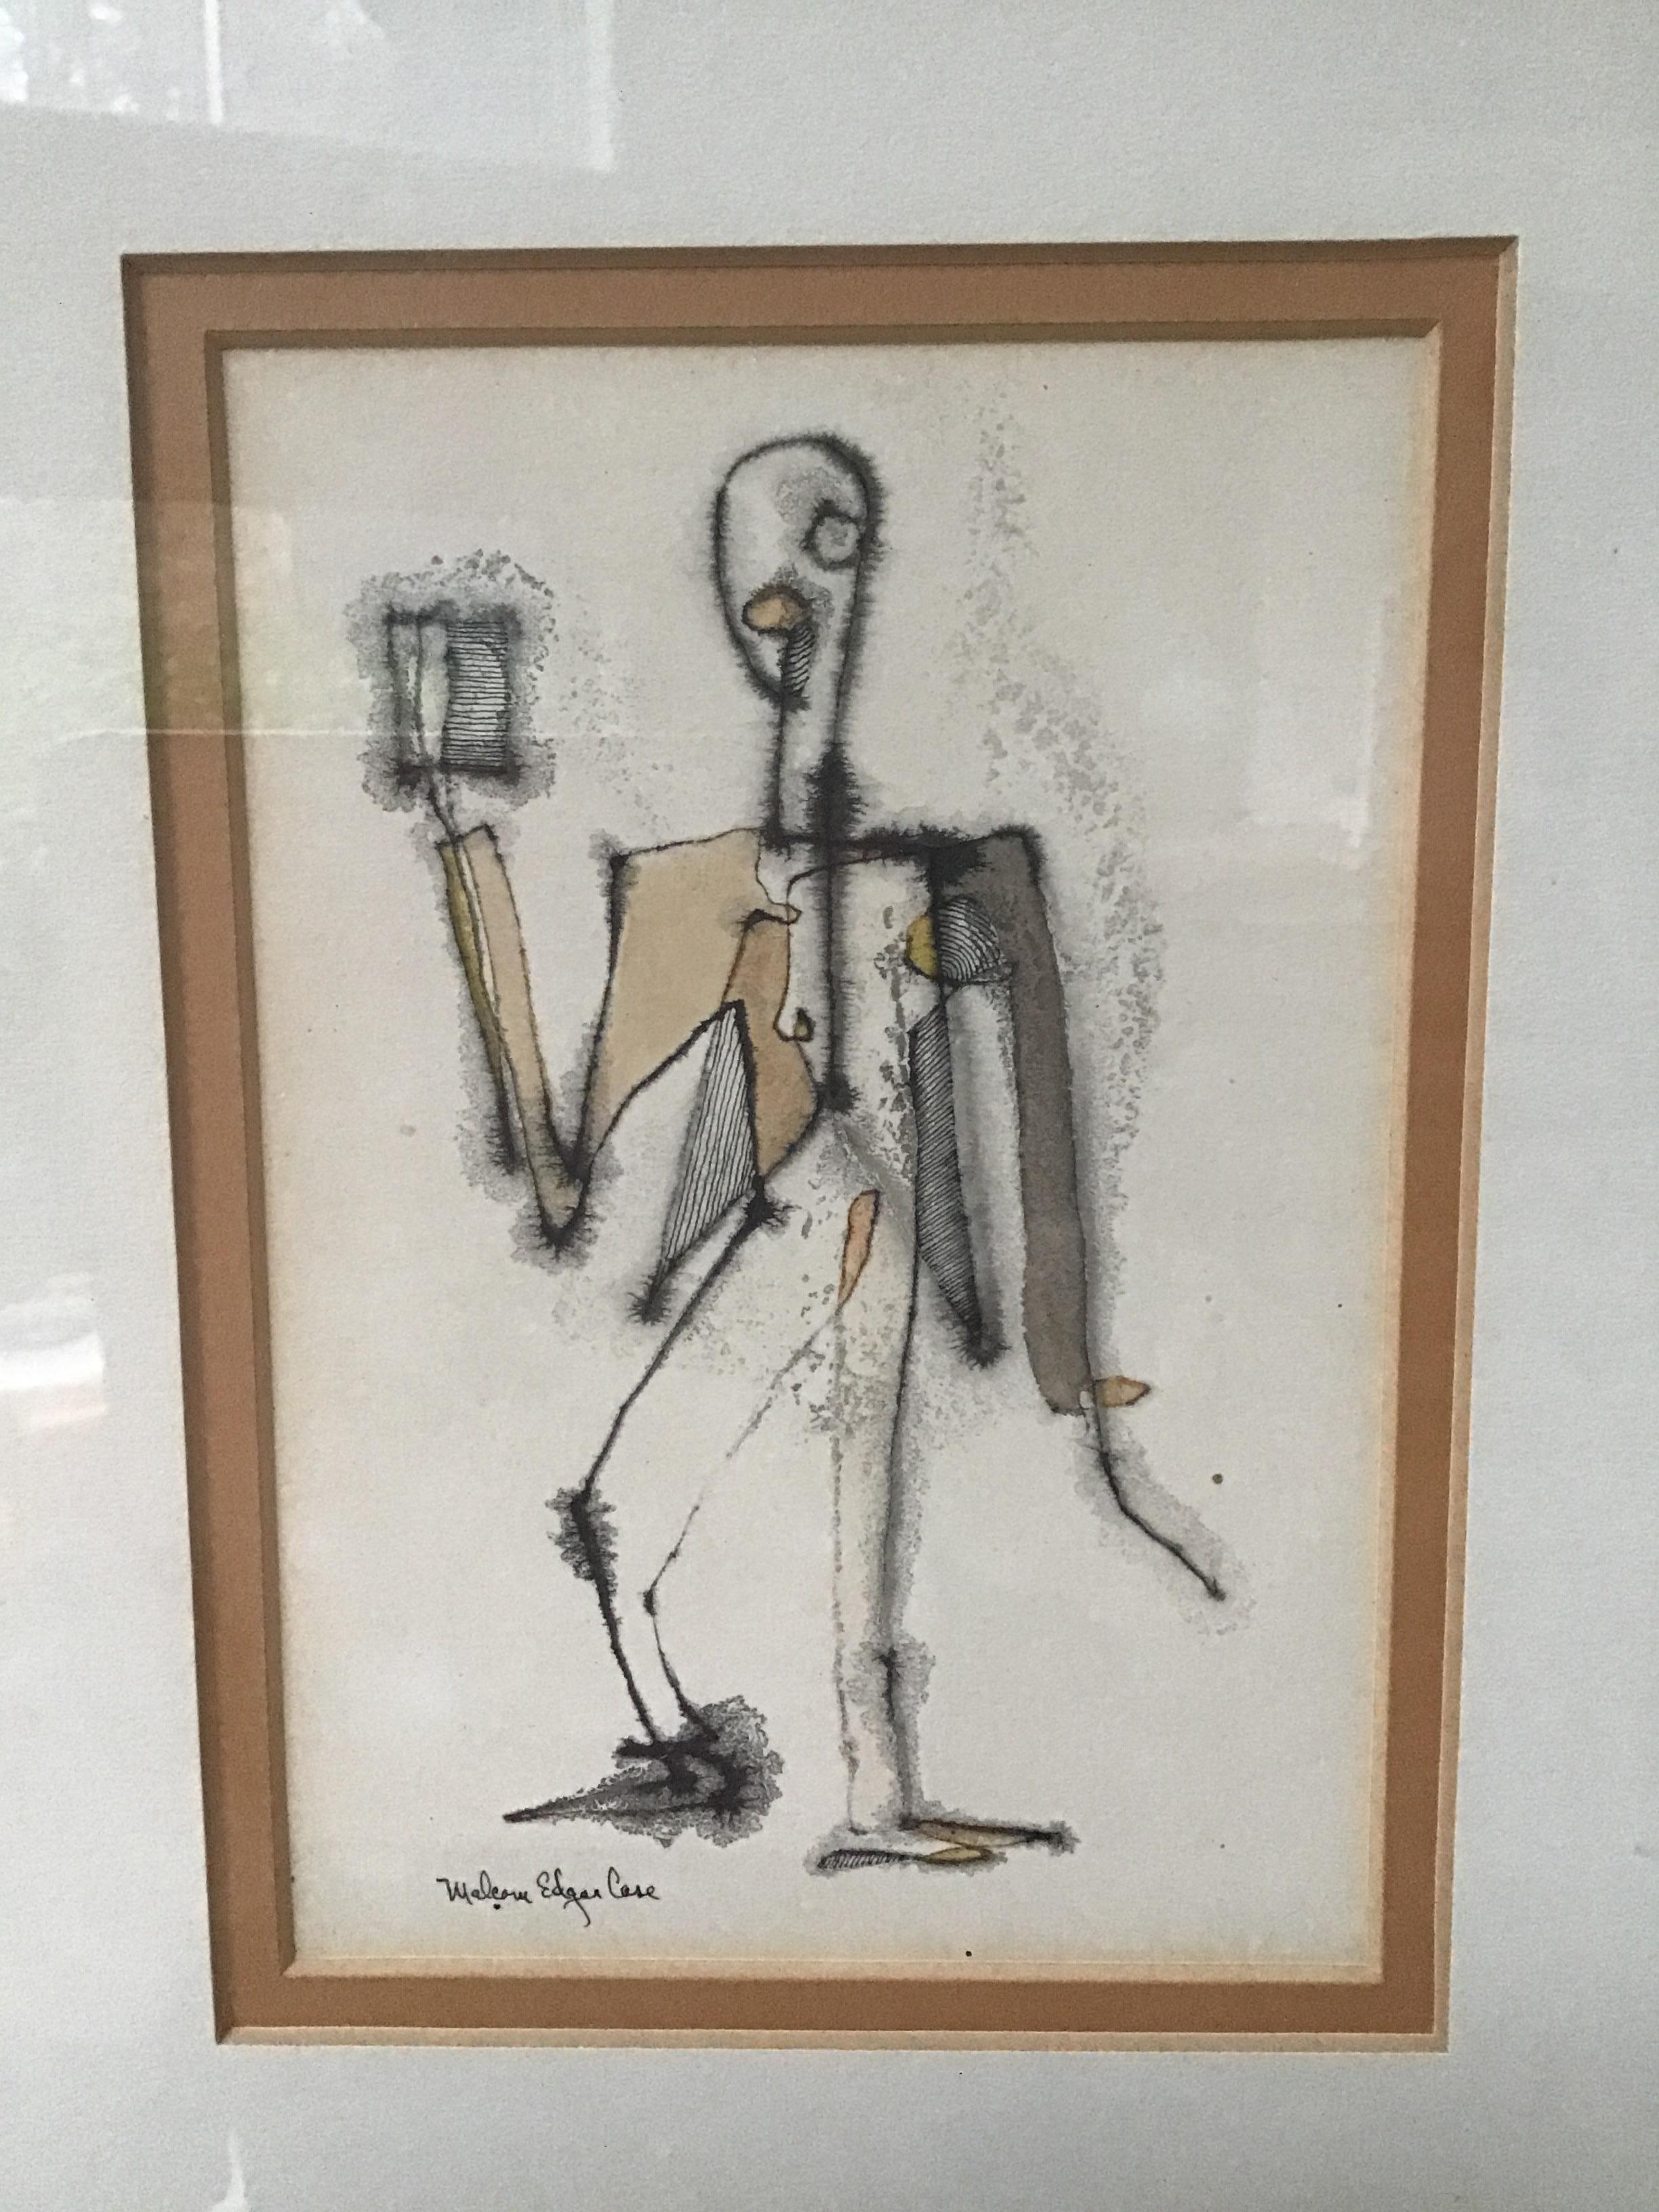 1950s Malcom Edgar case ink and watercolor on paper of a man.